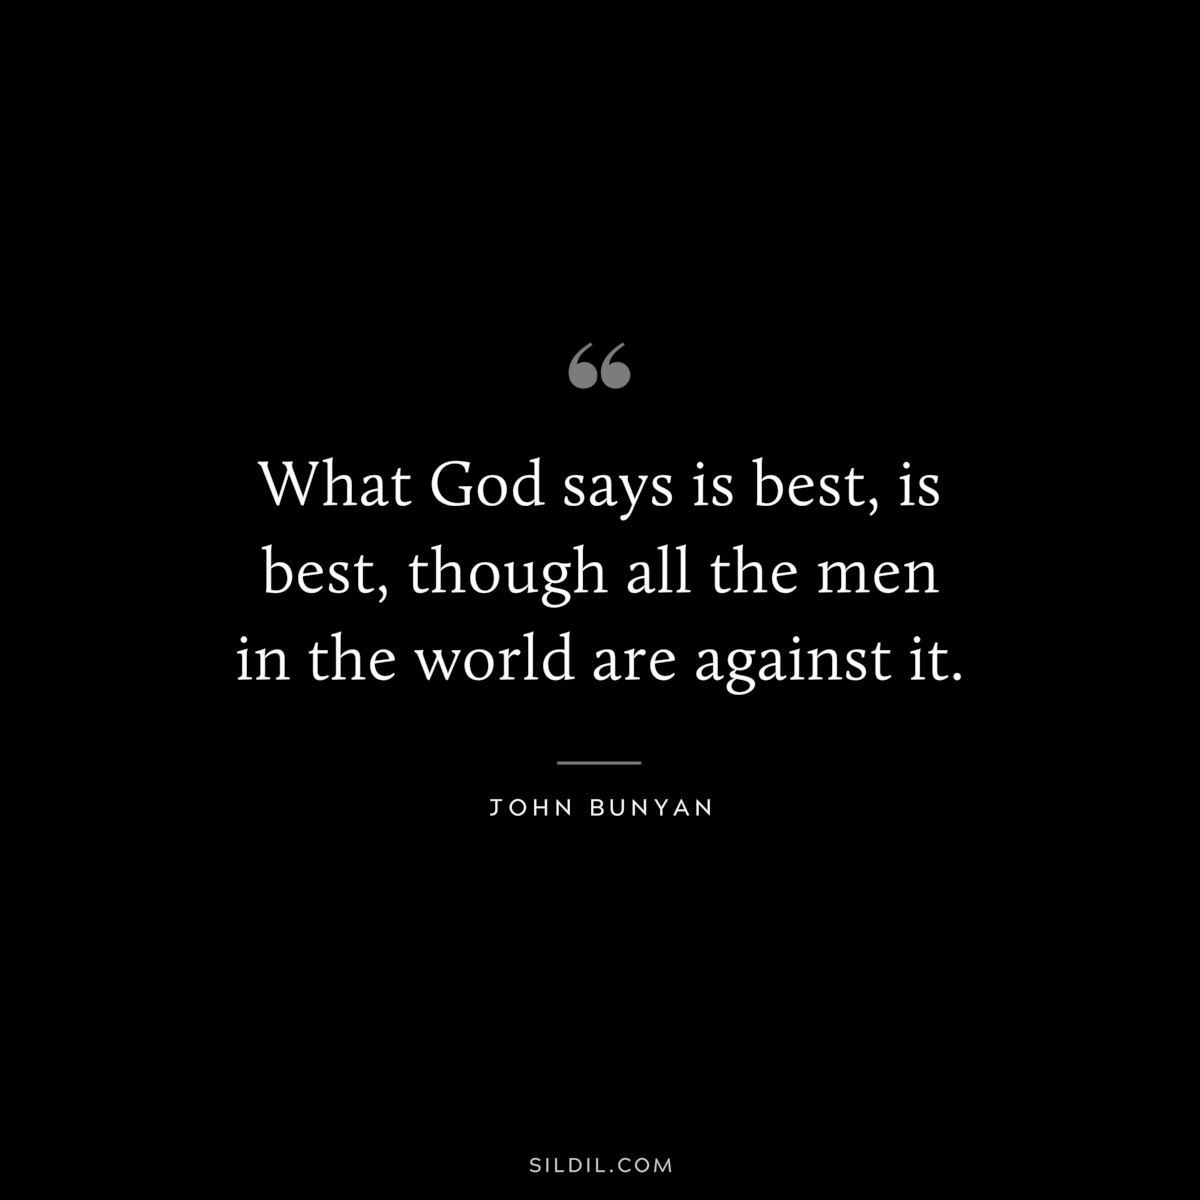 What God says is best, is best, though all the men in the world are against it. ― John Bunyan